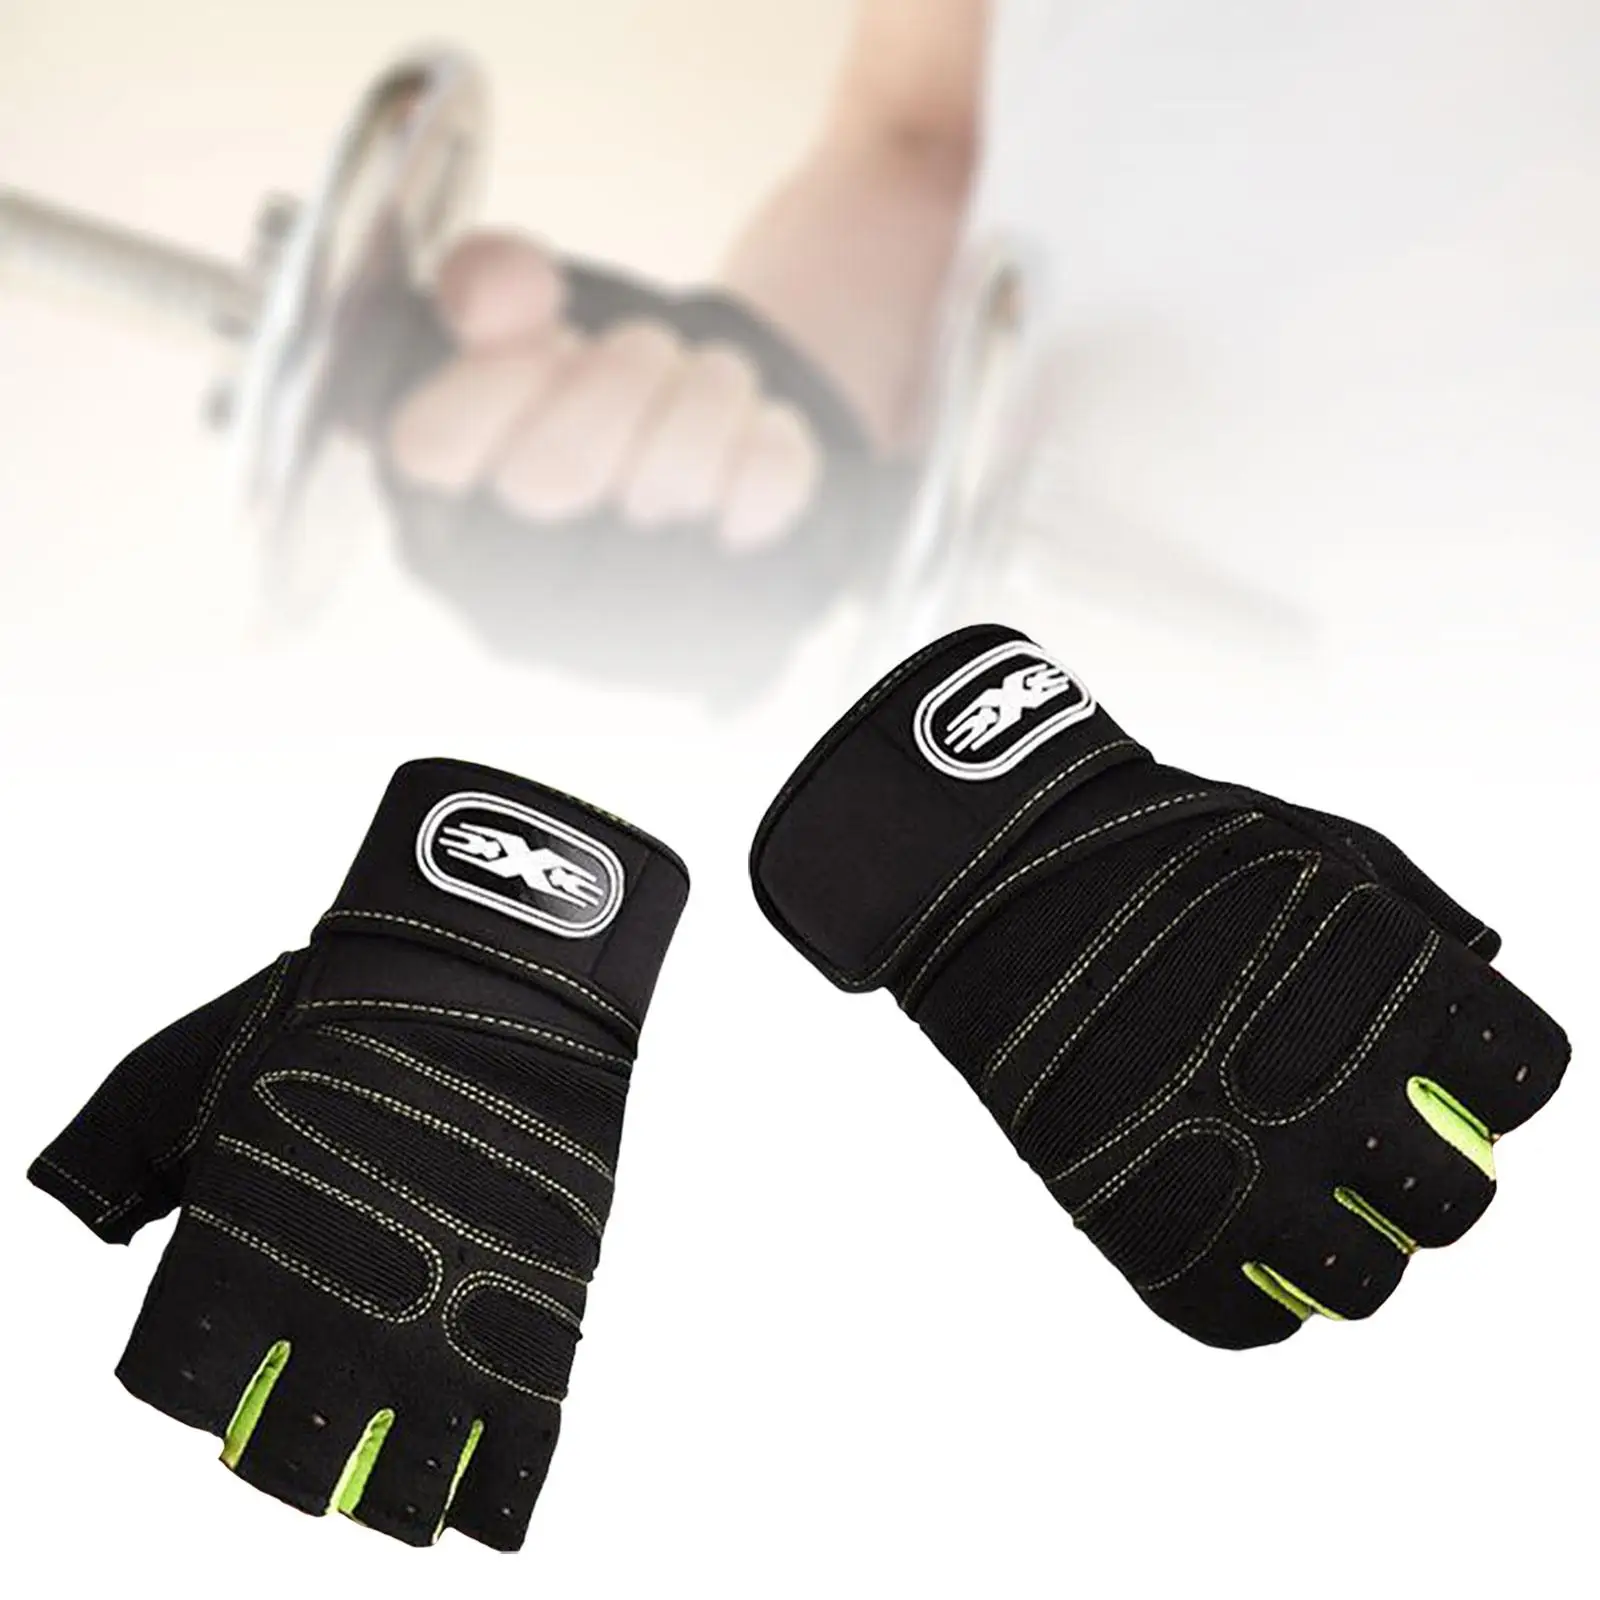 Gym Gloves Nonslip Lightweight with Grip Weight Lifting Gloves for Bodybuilding Cycling Training Sport Equipment Exercise